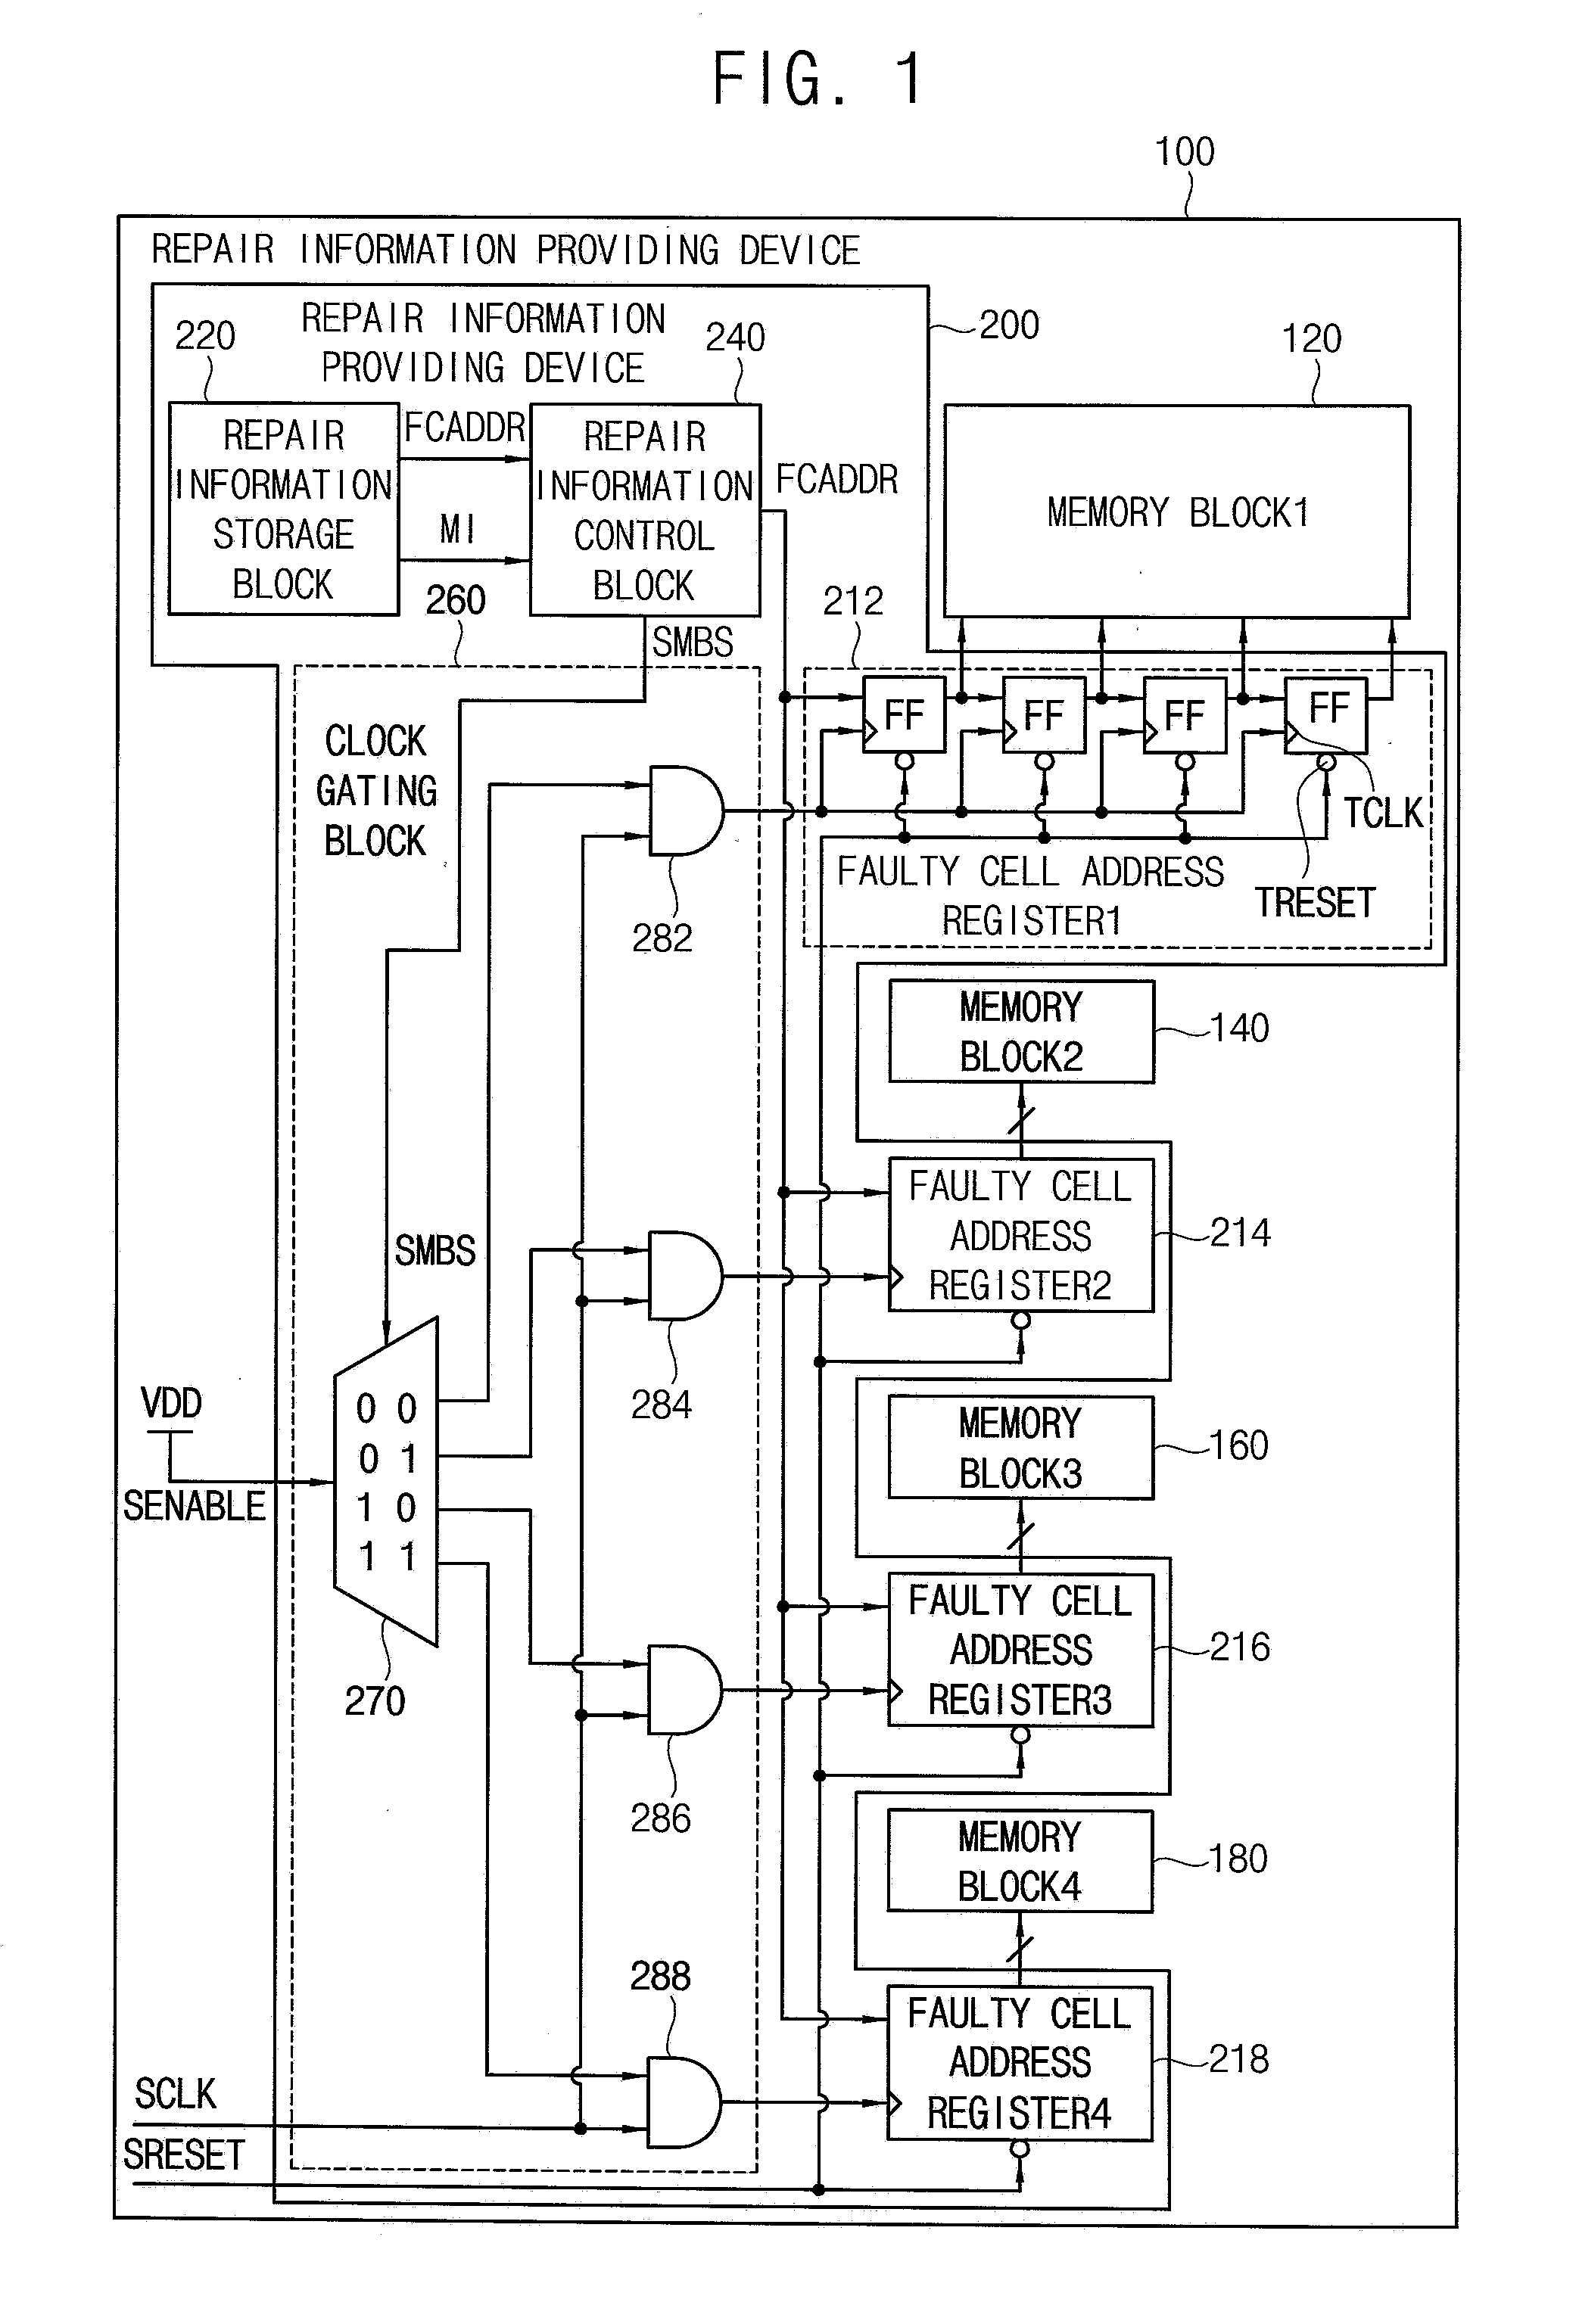 Repair information providing device in an integrated circuit